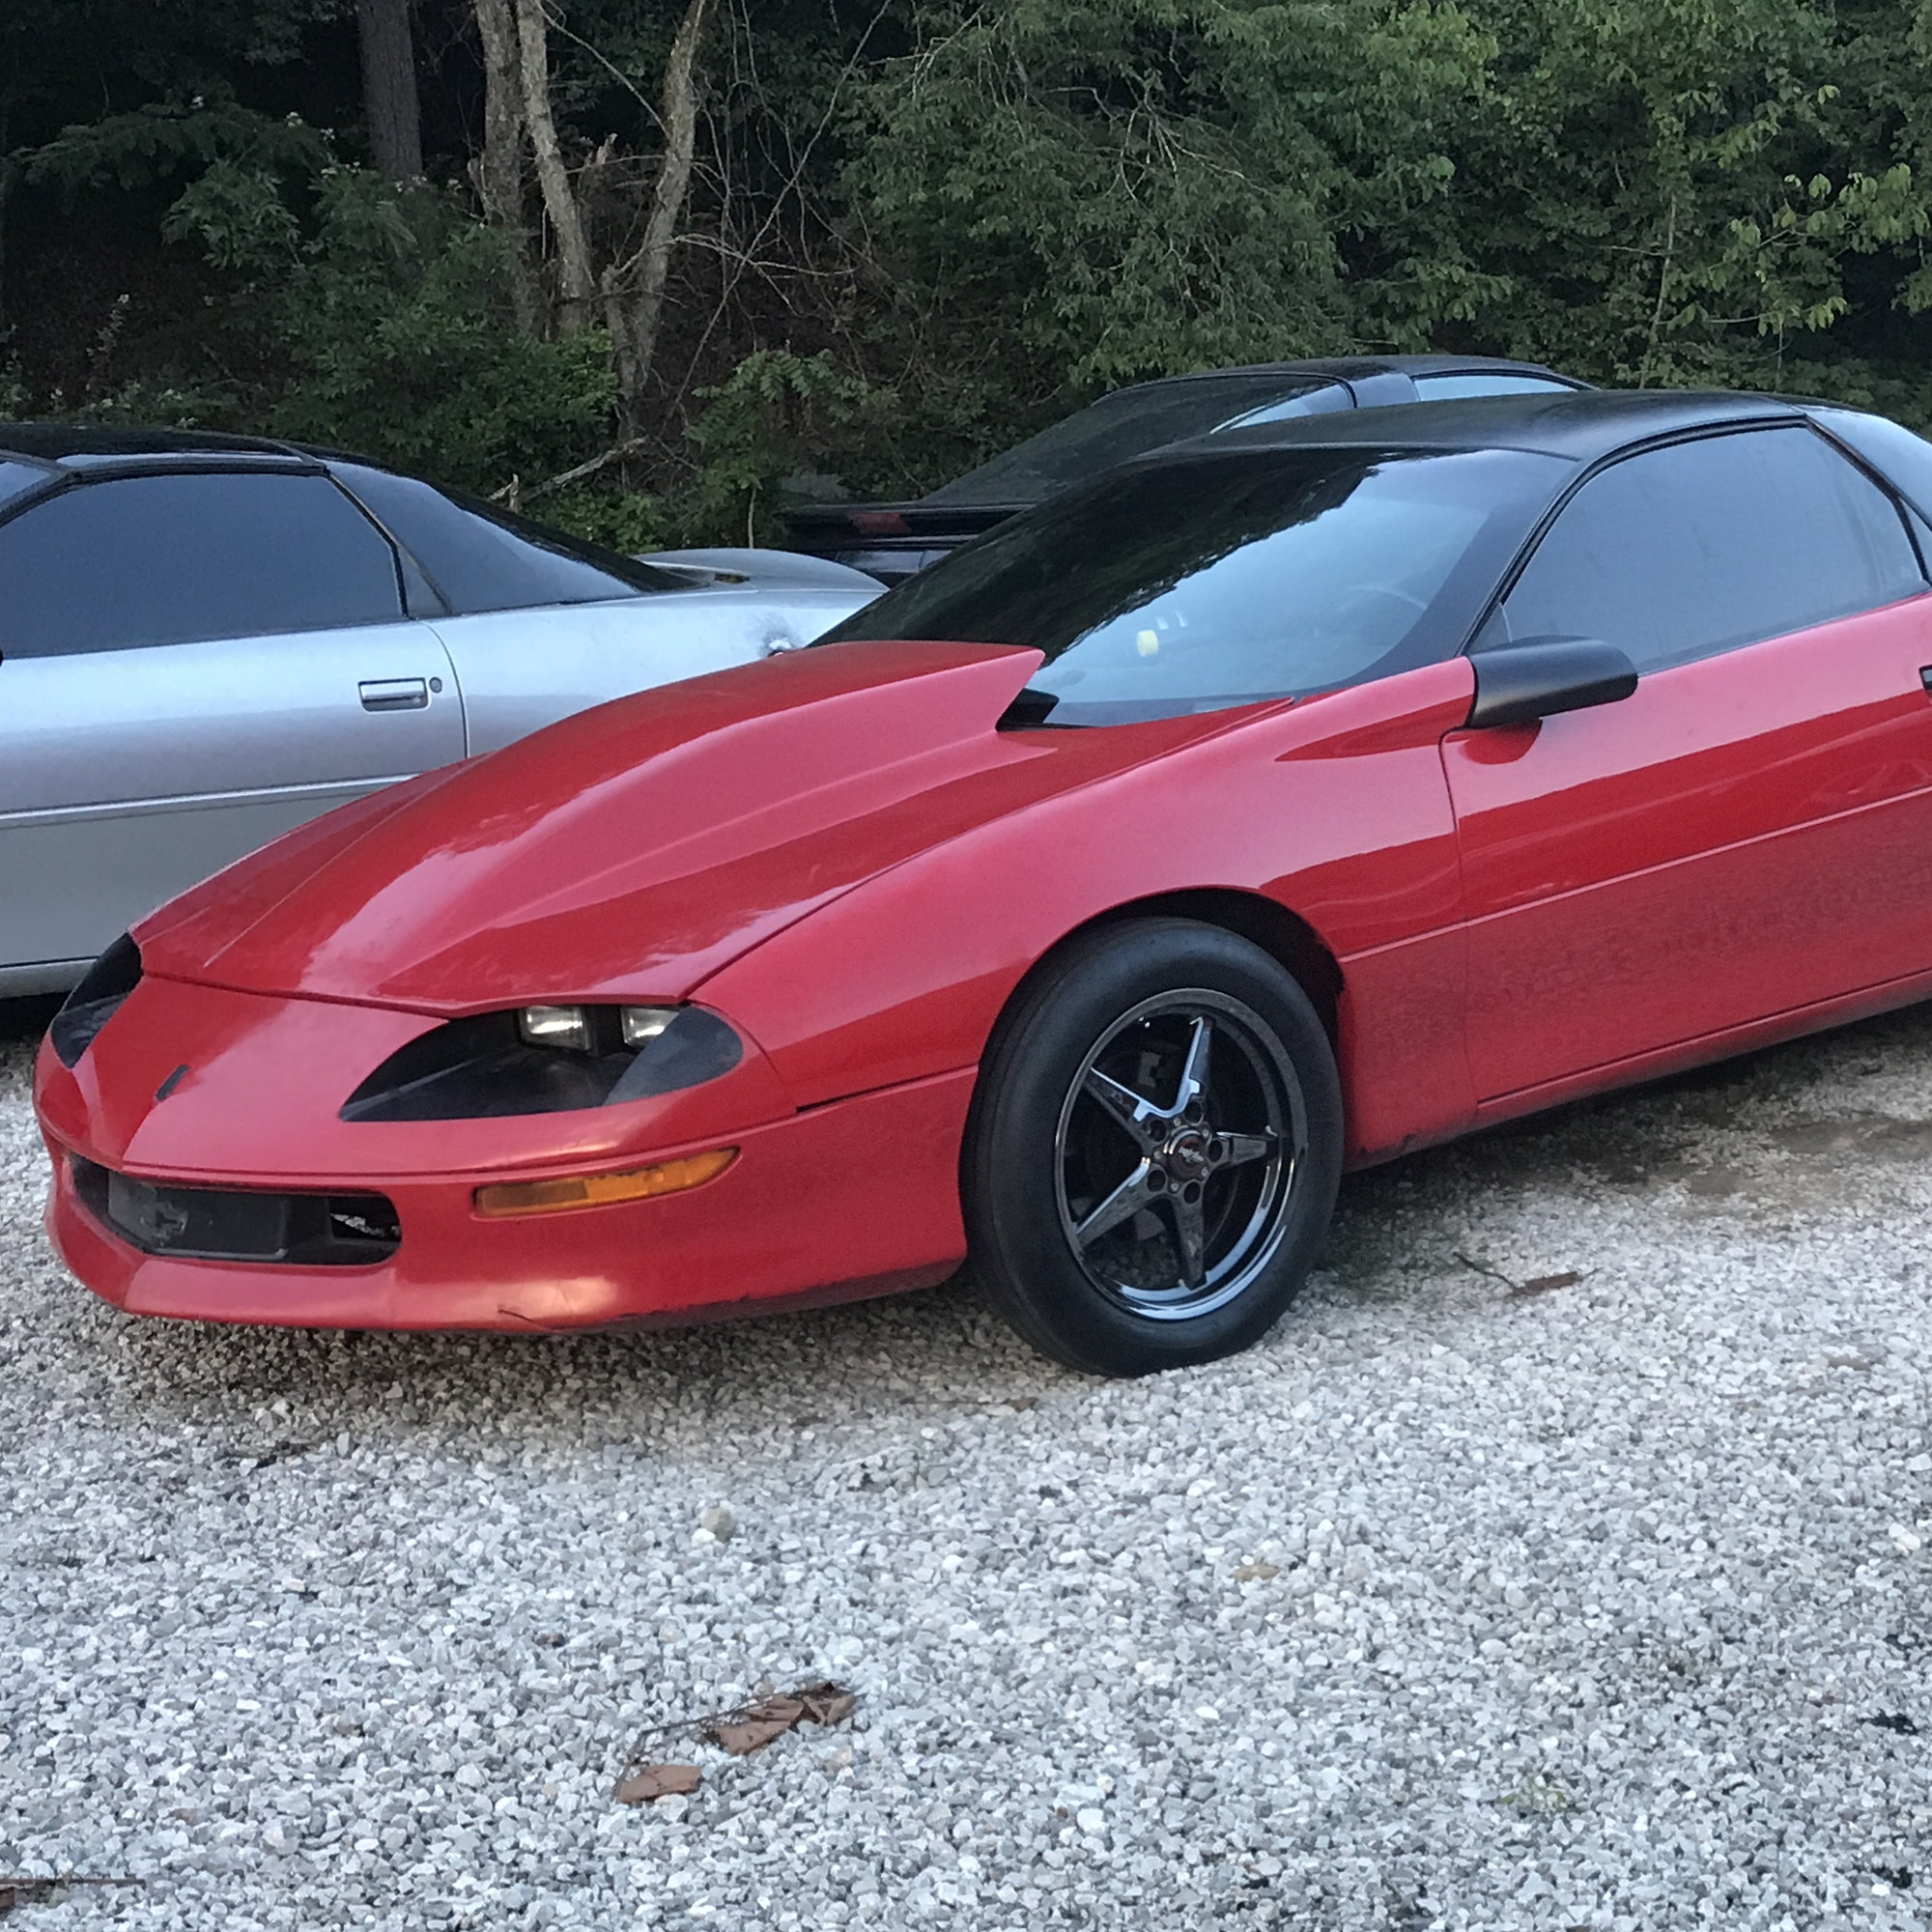 1993 Chevrolet Camaro - 1993 Camaro Z28 LS1 Turbo W/ Powerglide - Used - VIN 2G1FP22P8P2112784 - 8 cyl - 2WD - Automatic - Coupe - Red - Bristol, TN 37620, United States